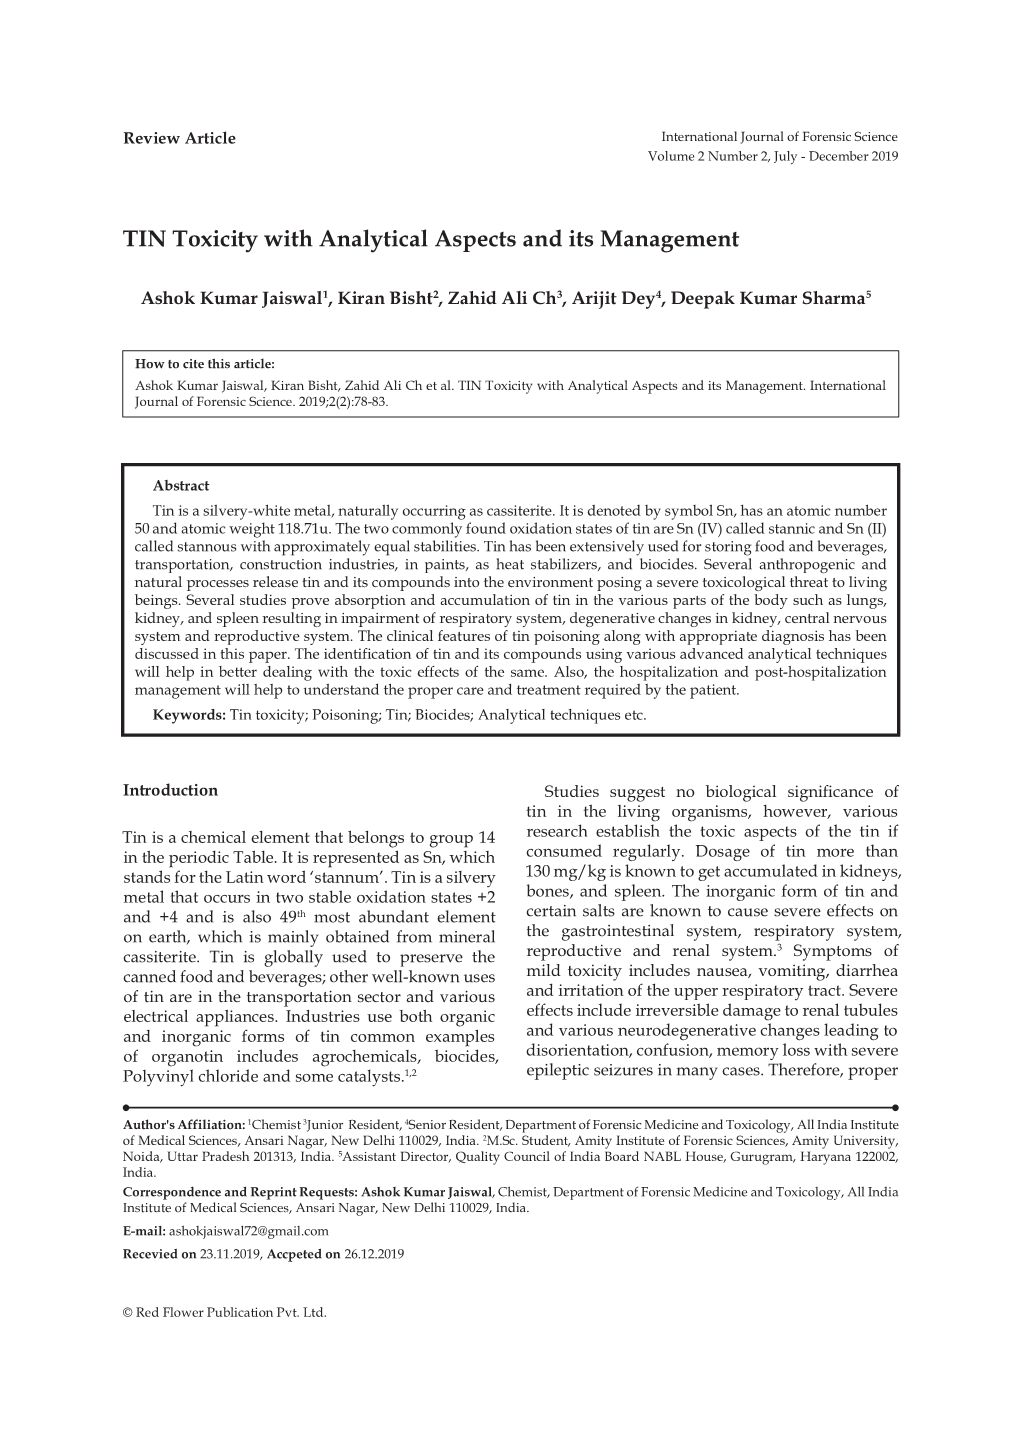 TIN Toxicity with Analytical Aspects and Its Management